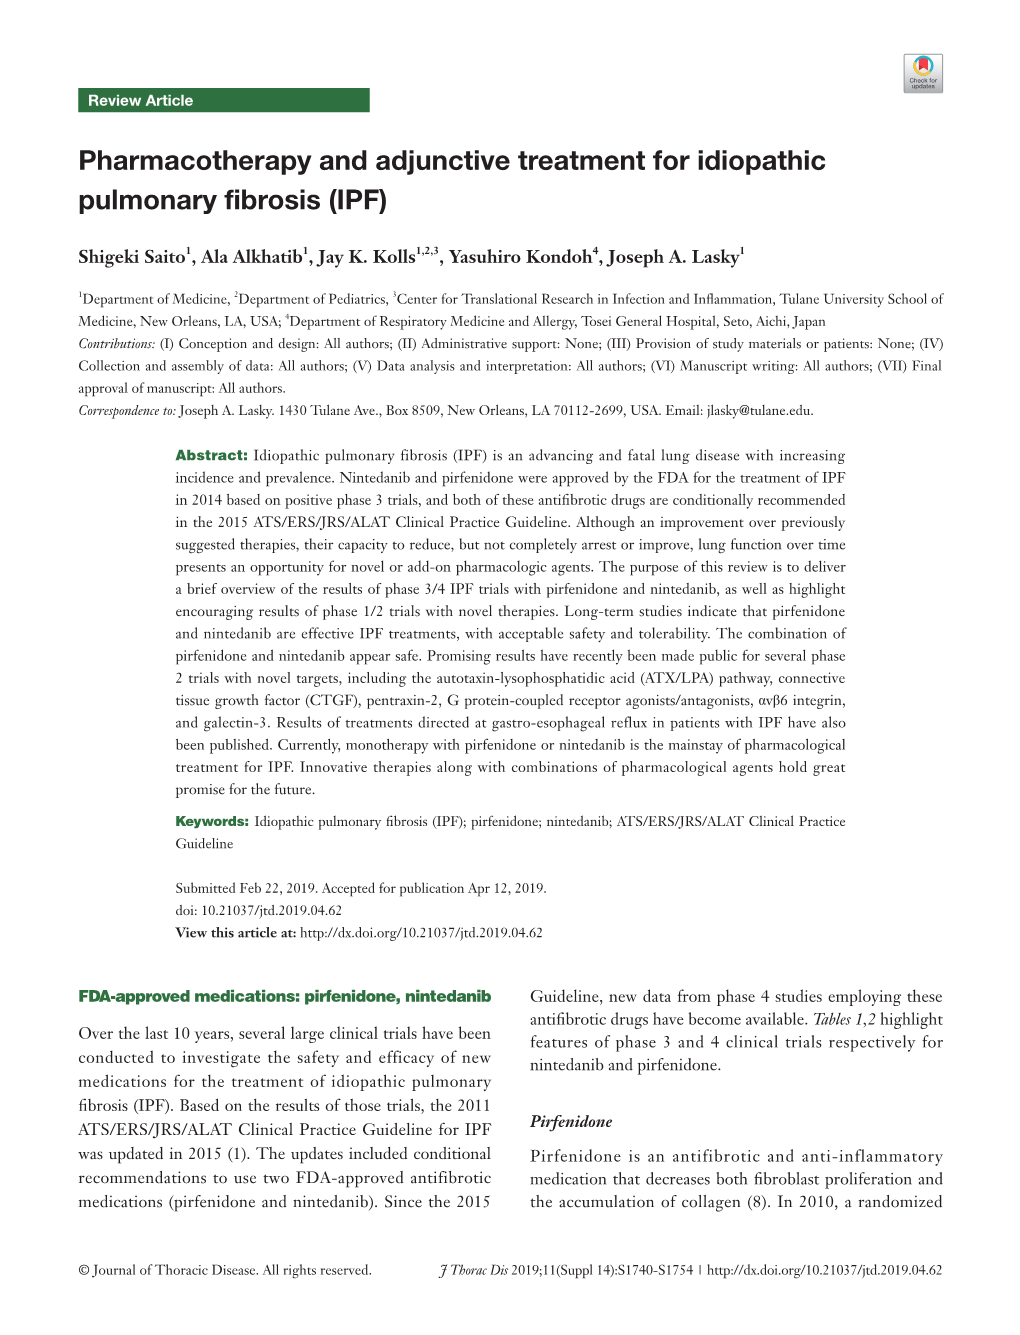 Pharmacotherapy and Adjunctive Treatment for Idiopathic Pulmonary Fibrosis (IPF)